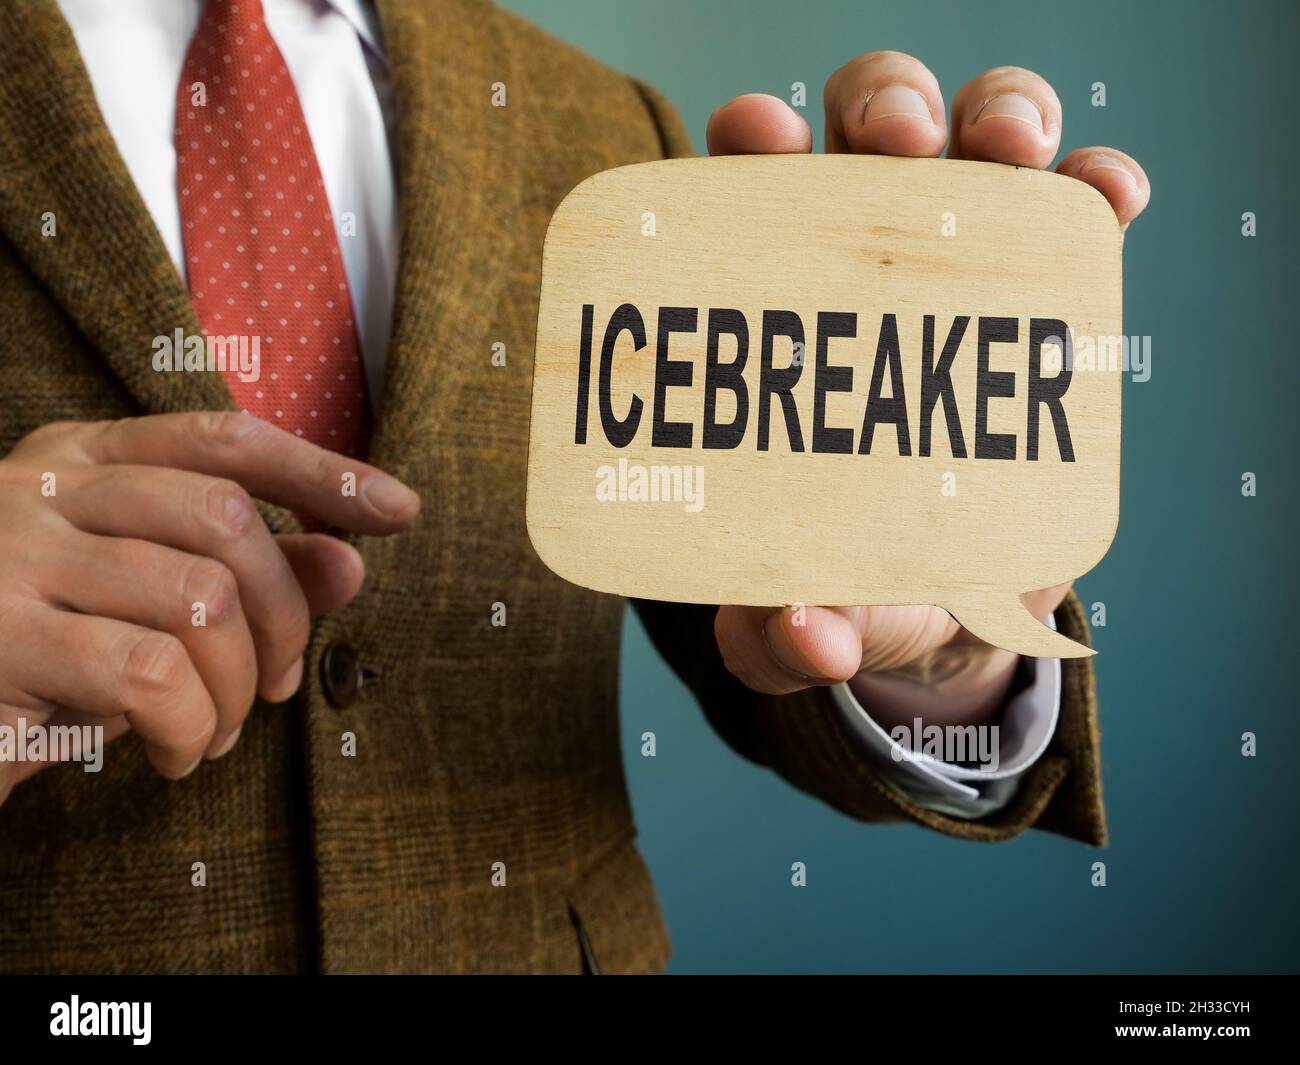 Man in suit shows Icebreaker sign on the plate. Stock Photo